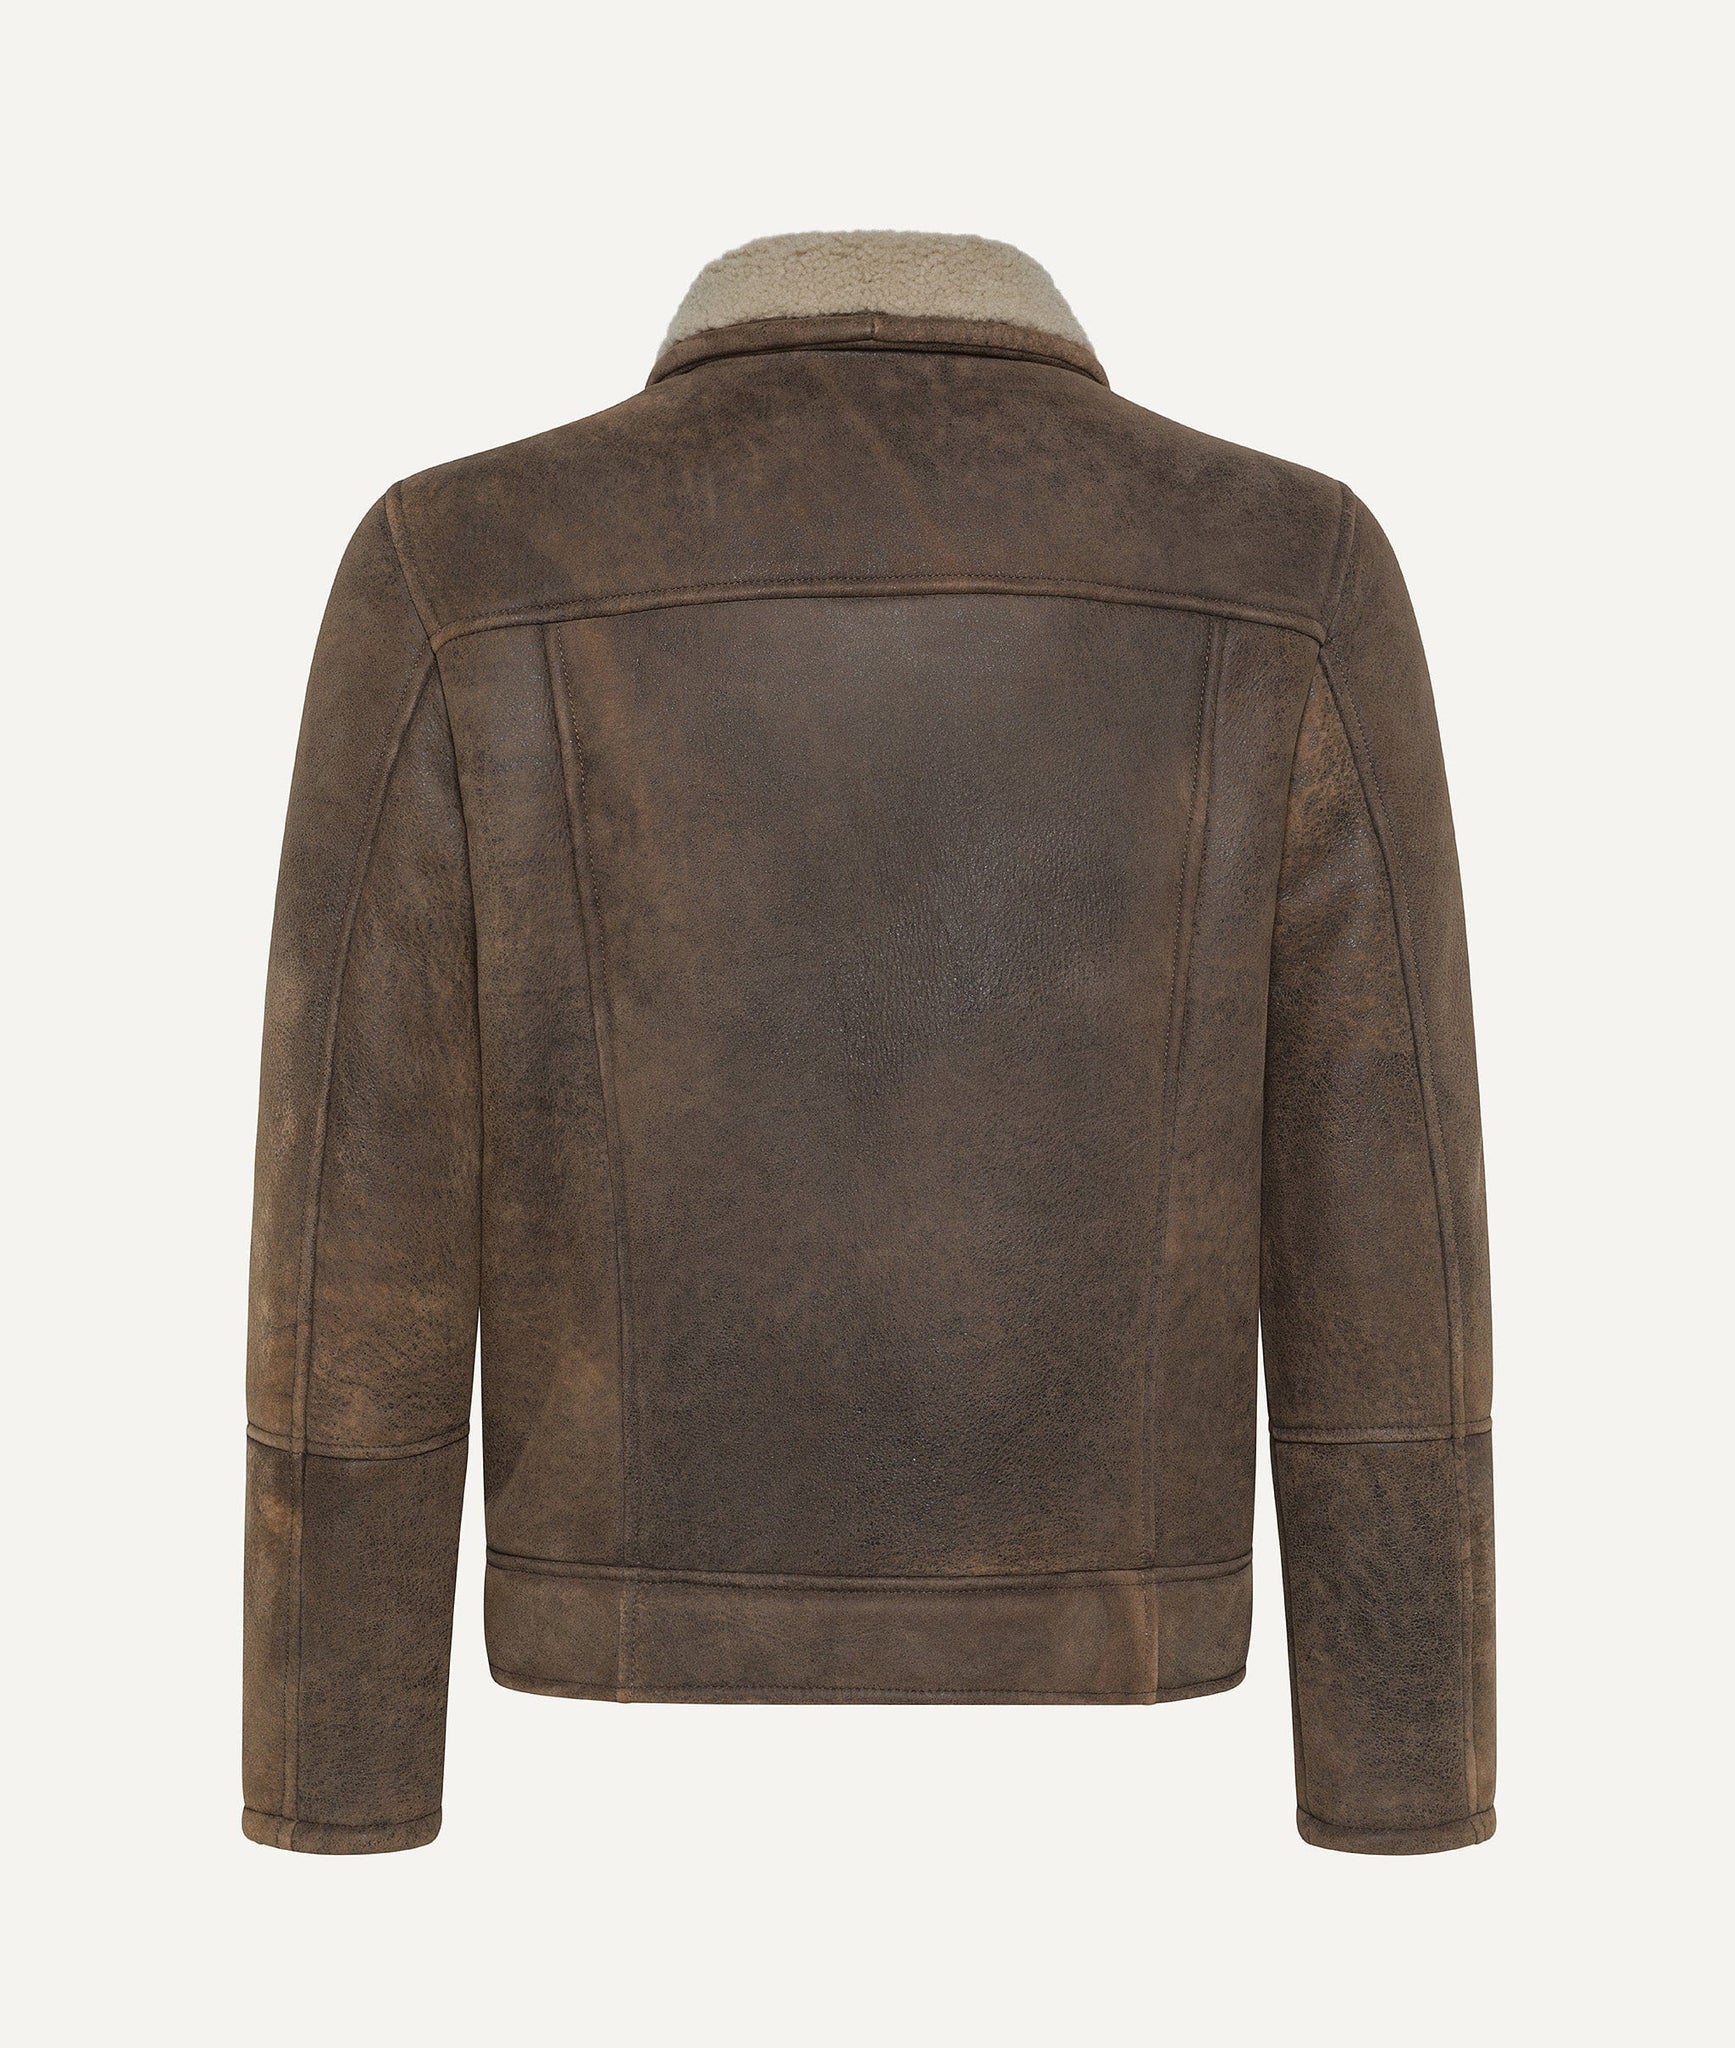 Eleventy - Leather Jacket with Shearling in Lambskin